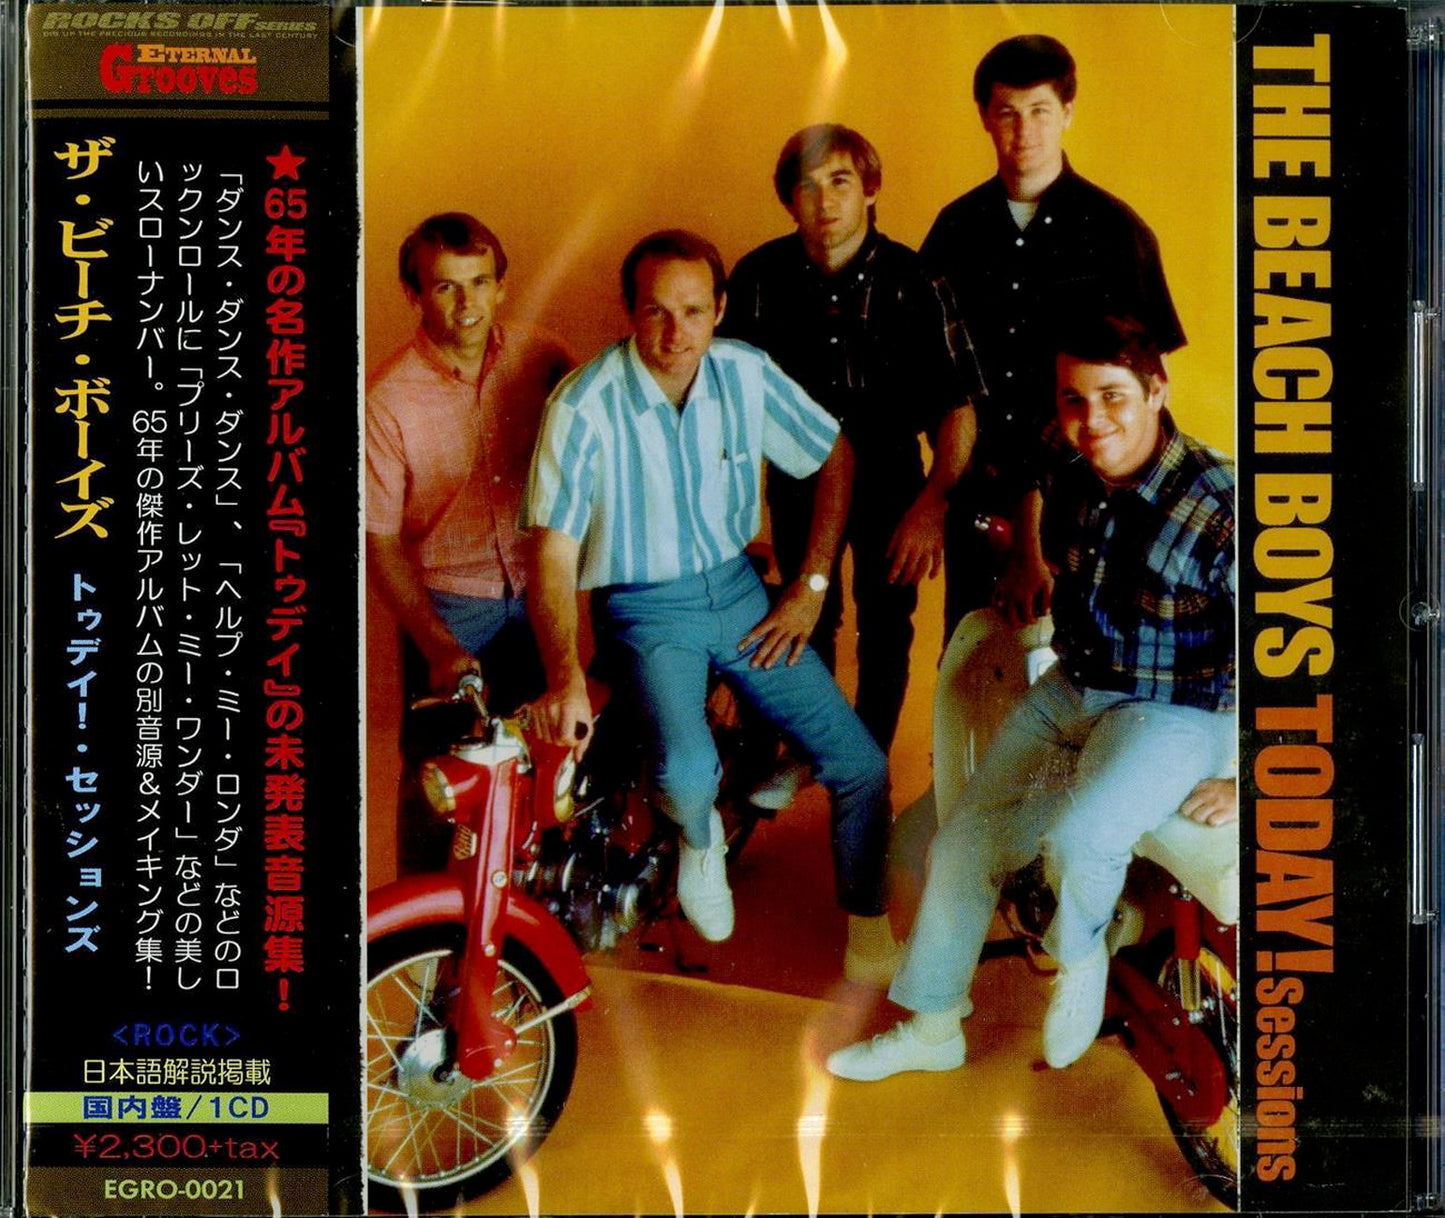 The Beach Boys - Today Sessions - Japan CD